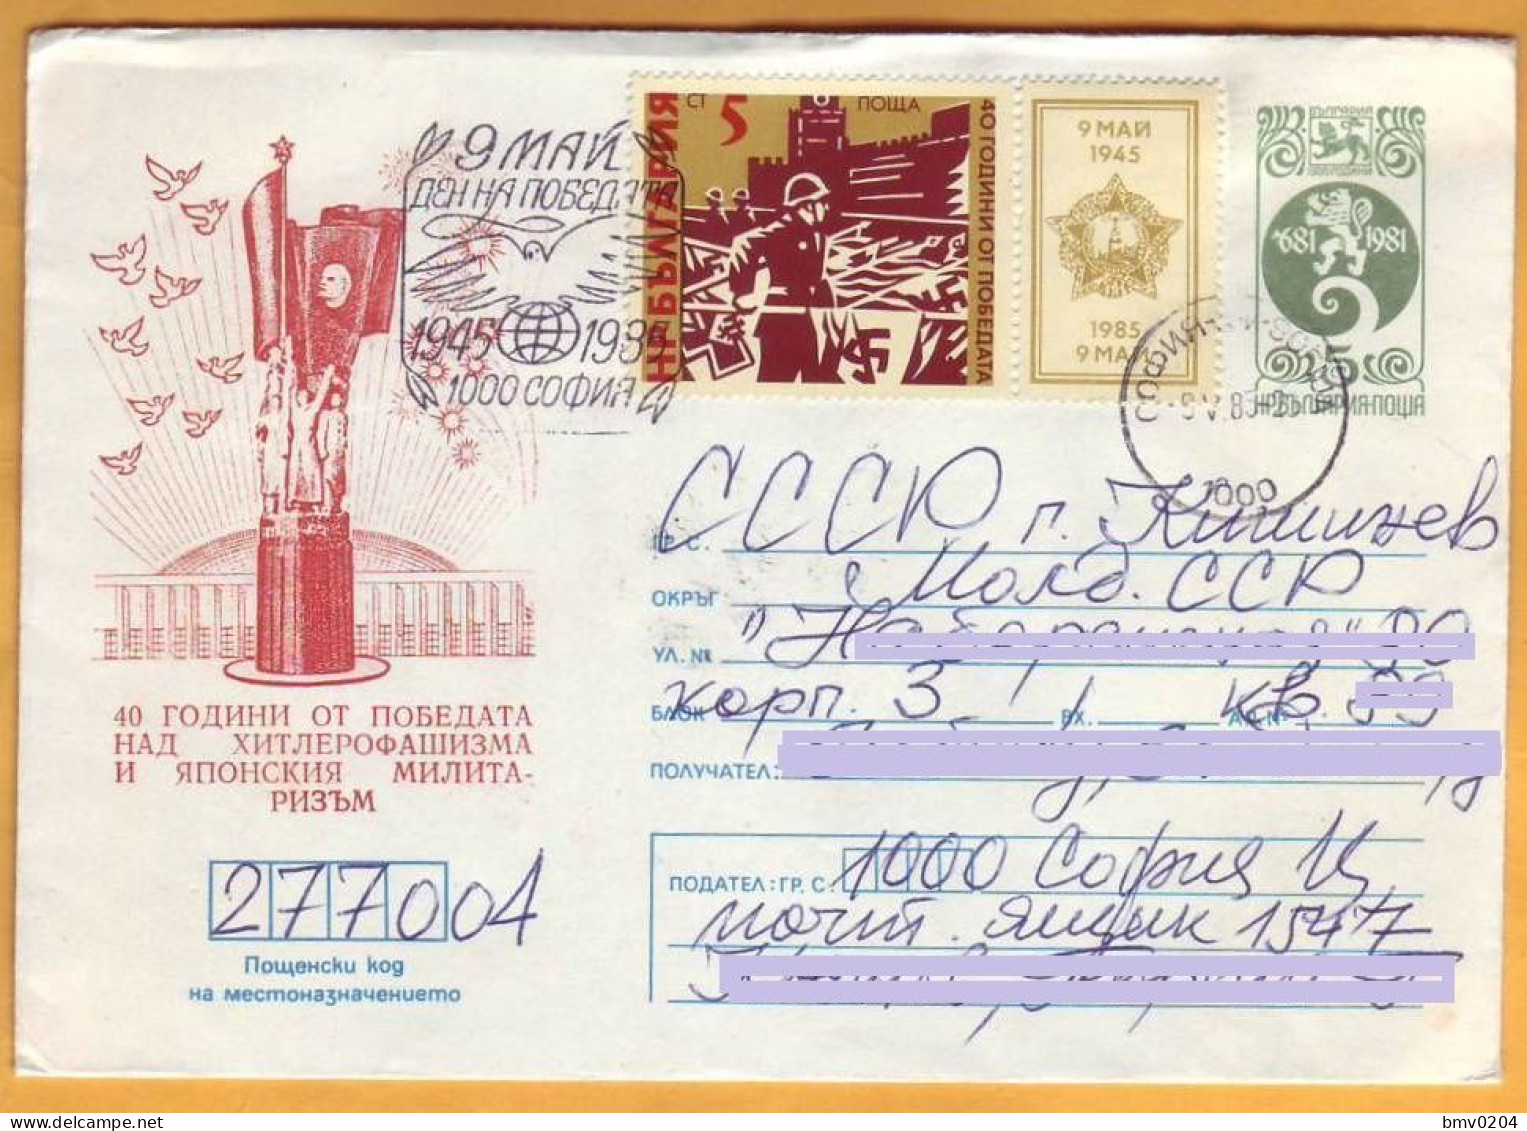 1983 1985 Bulgaria Postal Stationery Used Victory Over Fascism, Order Of Victory - Covers